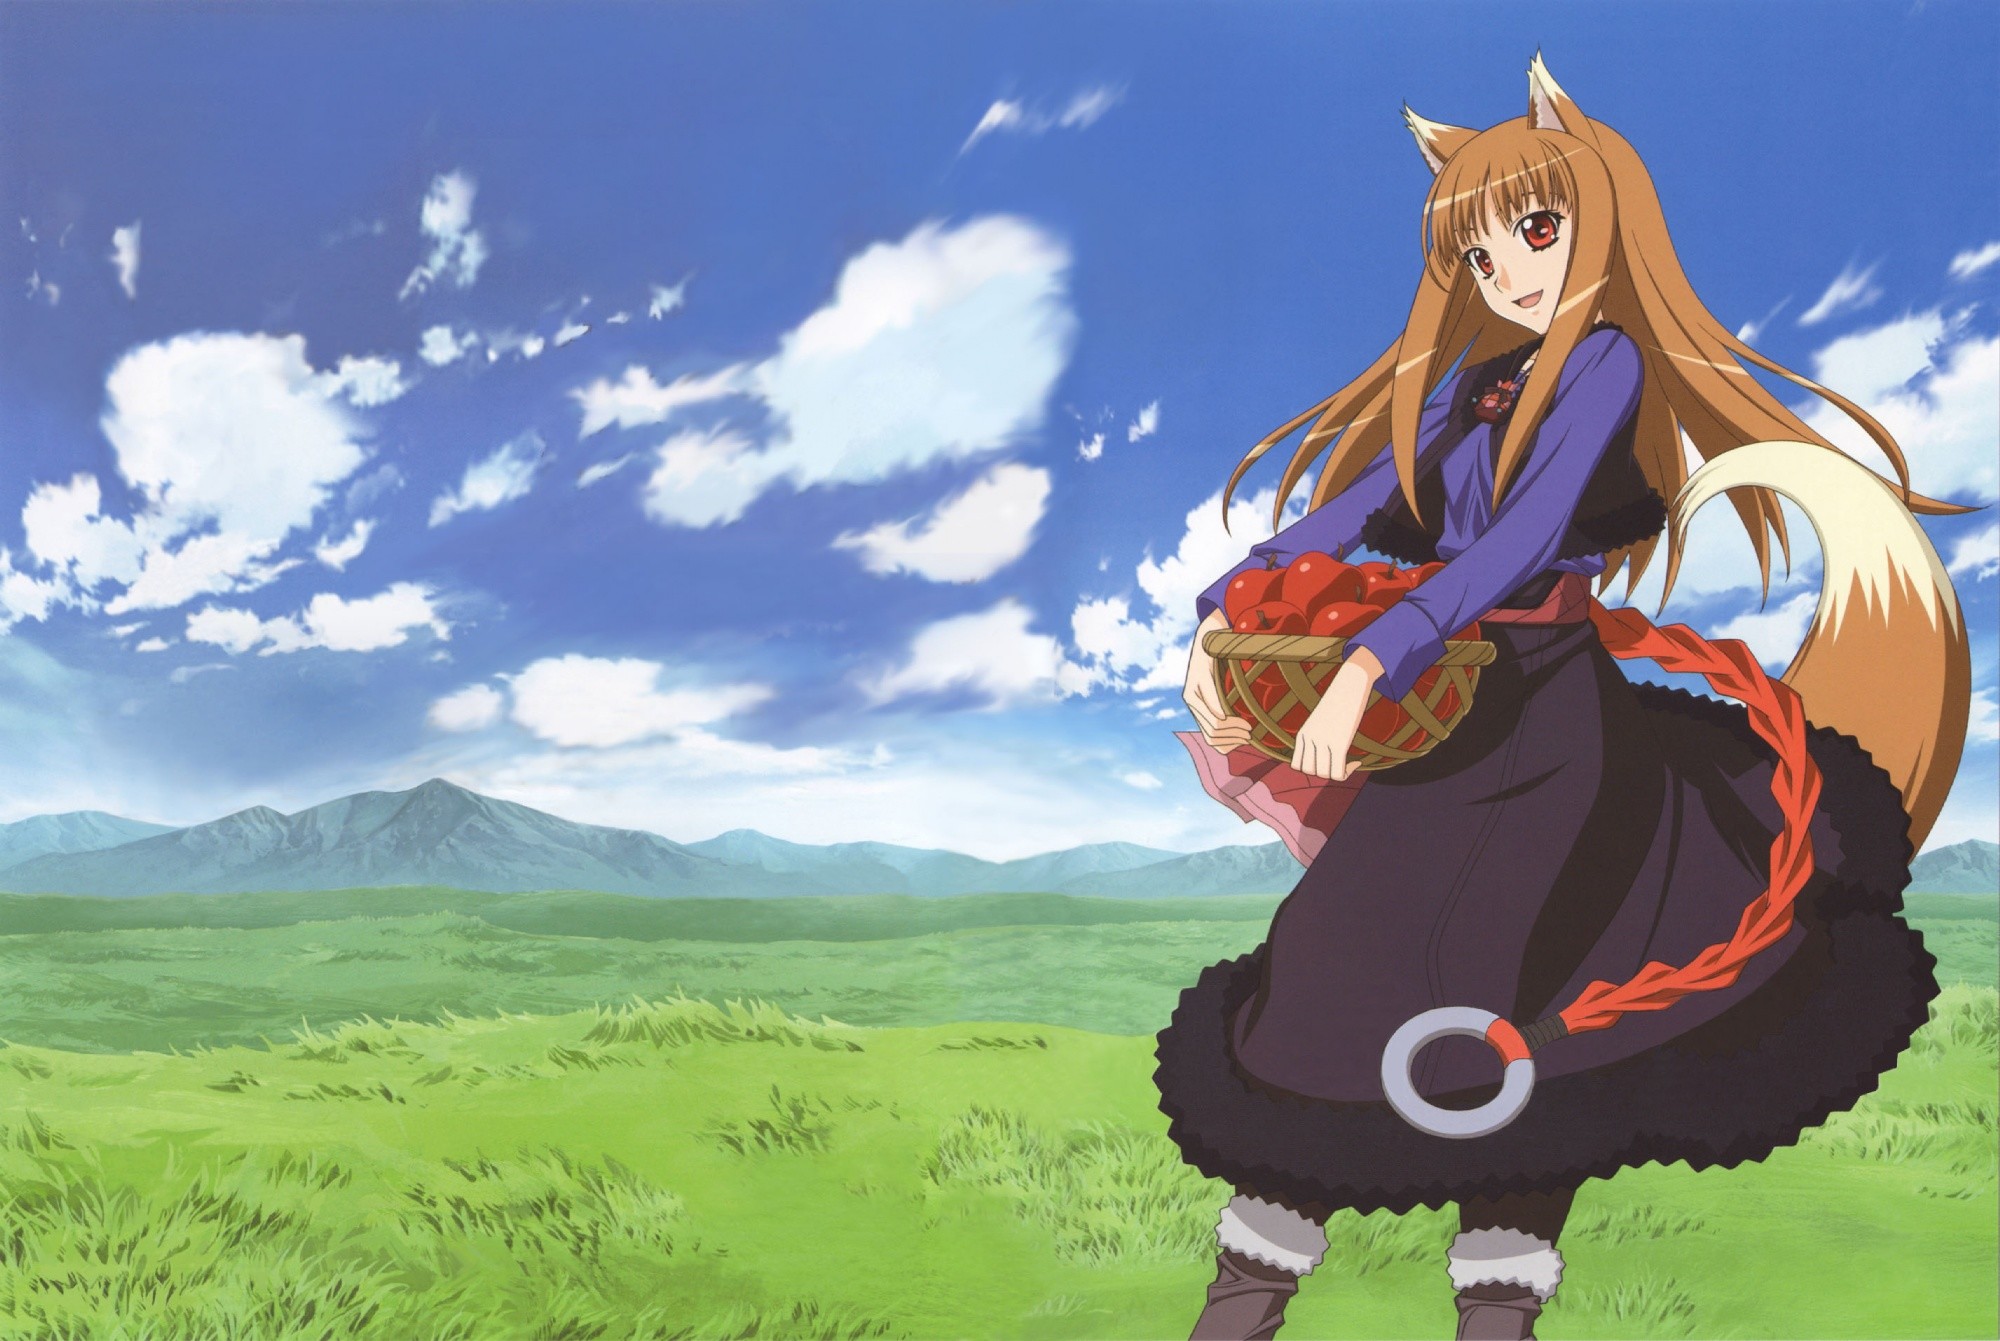 HD Wallpaper | Background ID:57690. Anime Spice and Wolf